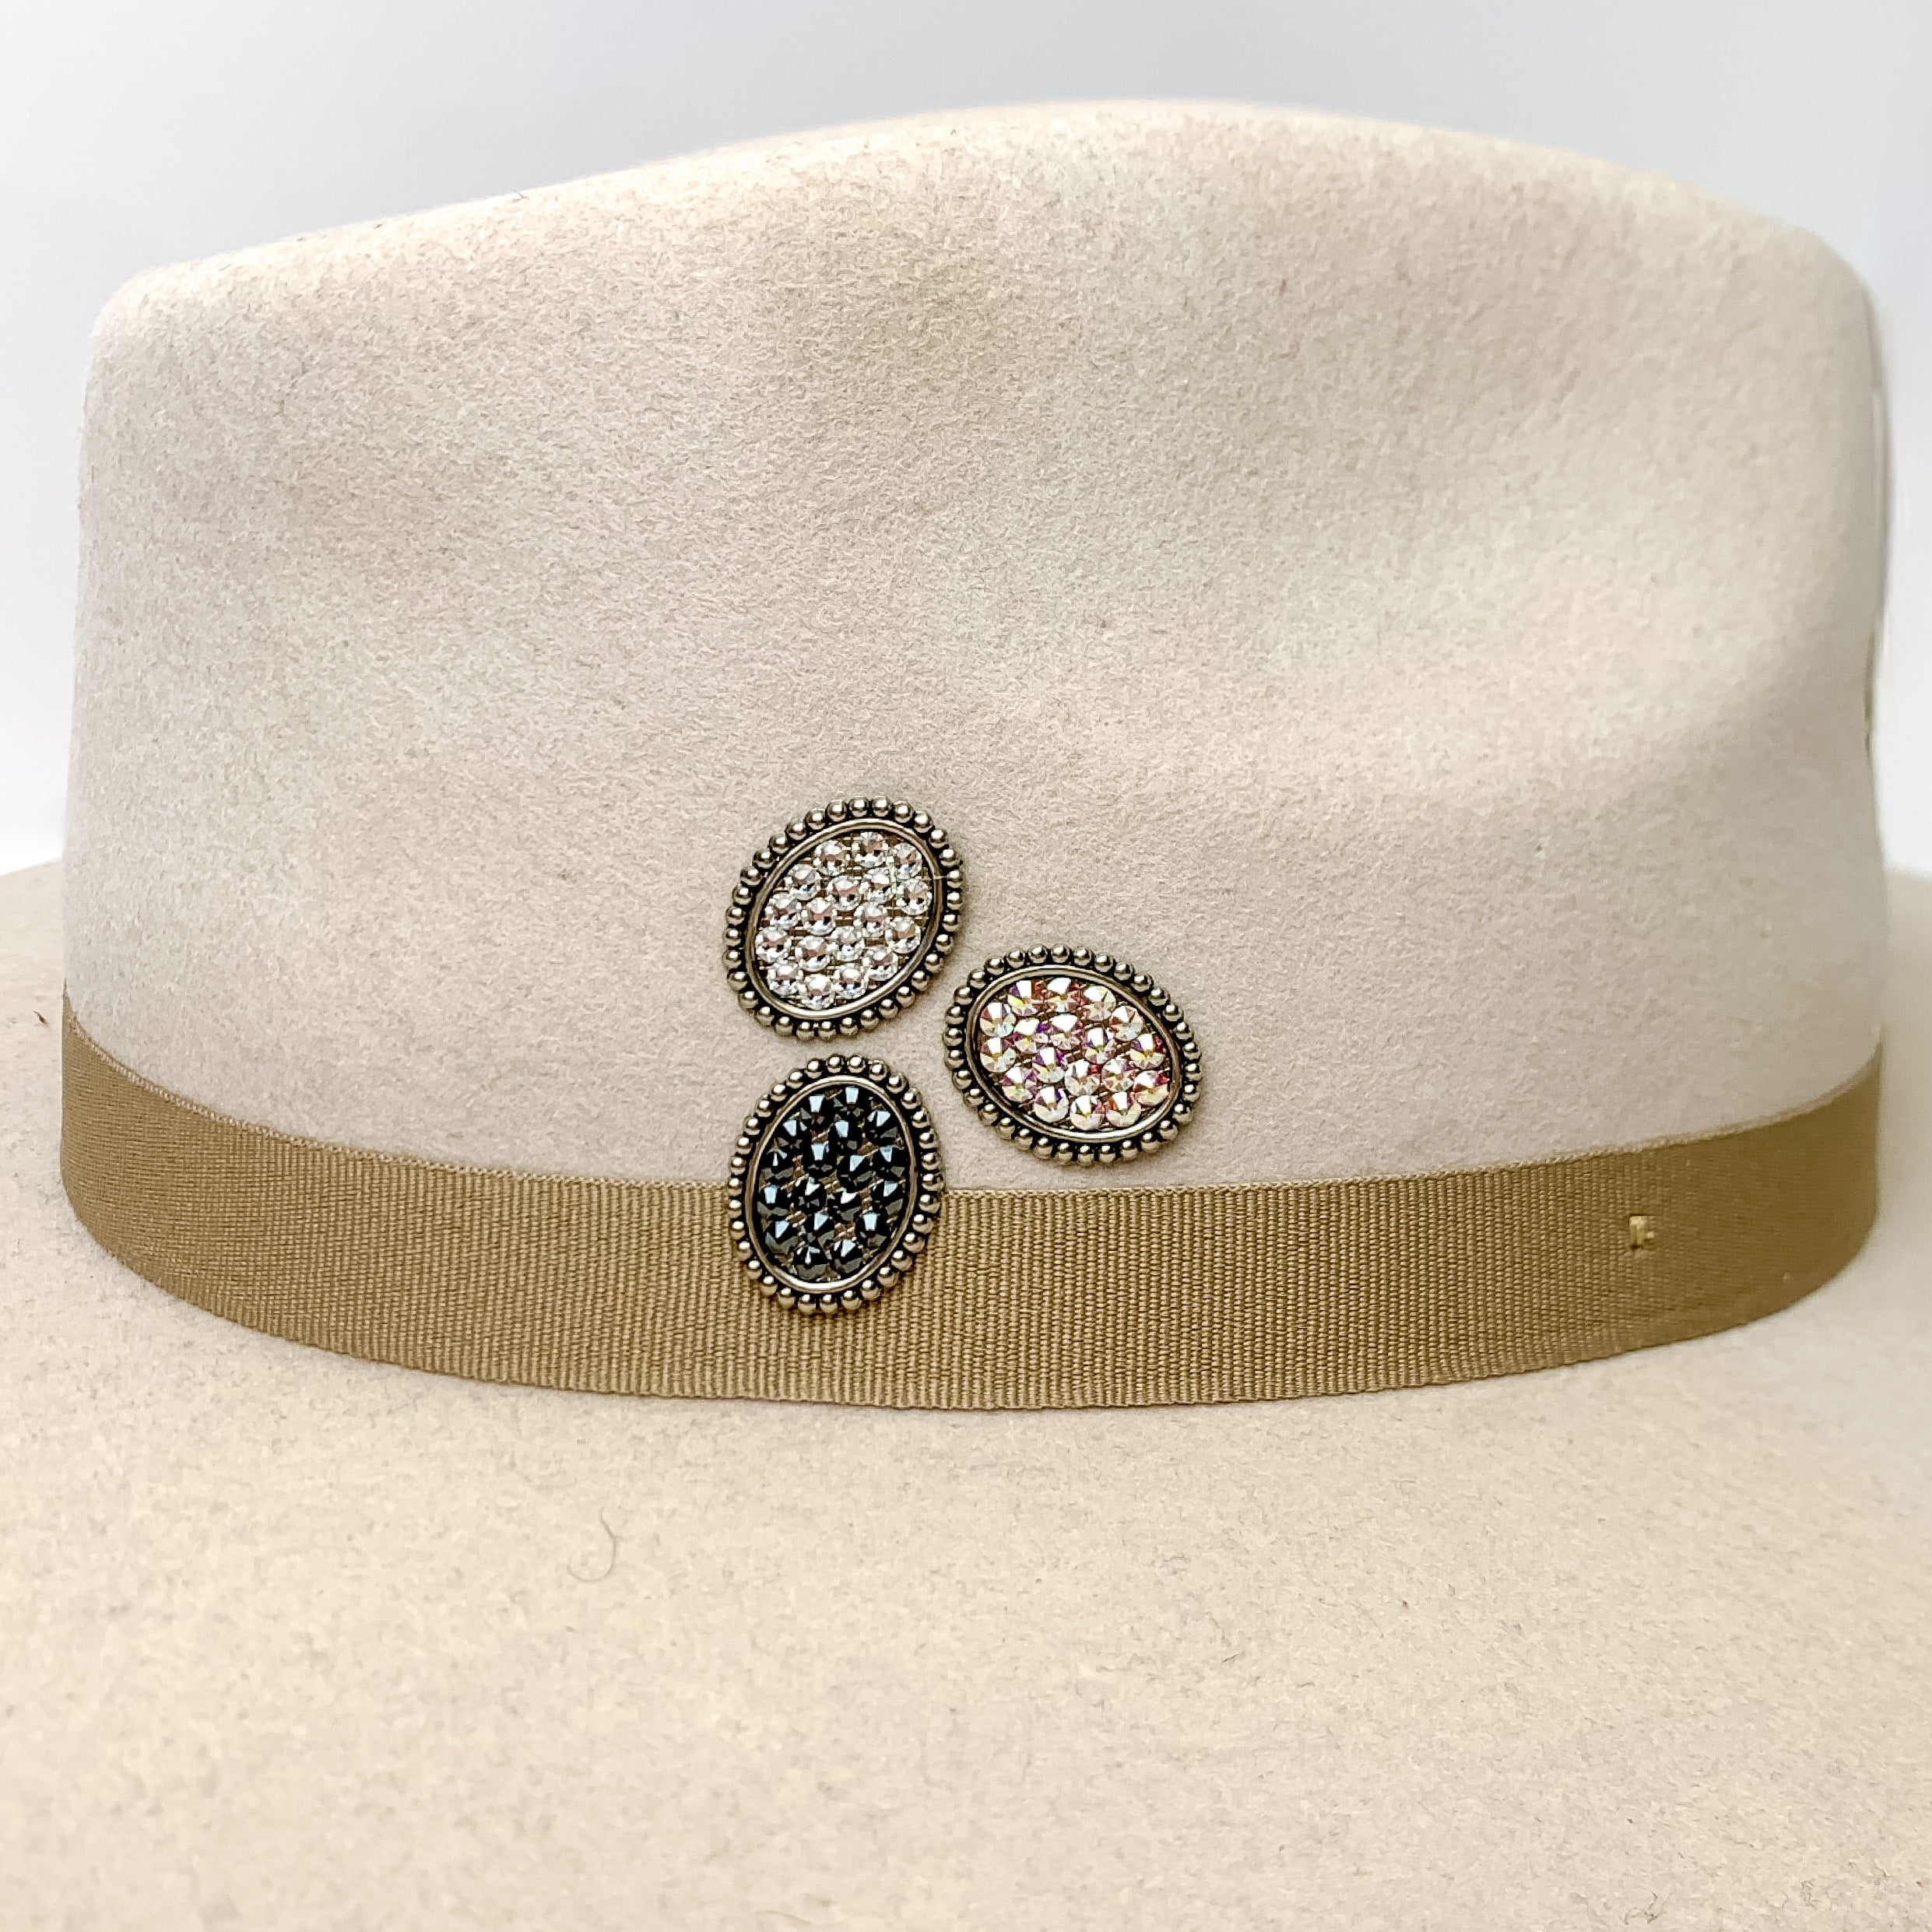 Pink Panache | Silver Tone Oval Hat Pin with Black Crystals - Giddy Up Glamour Boutique